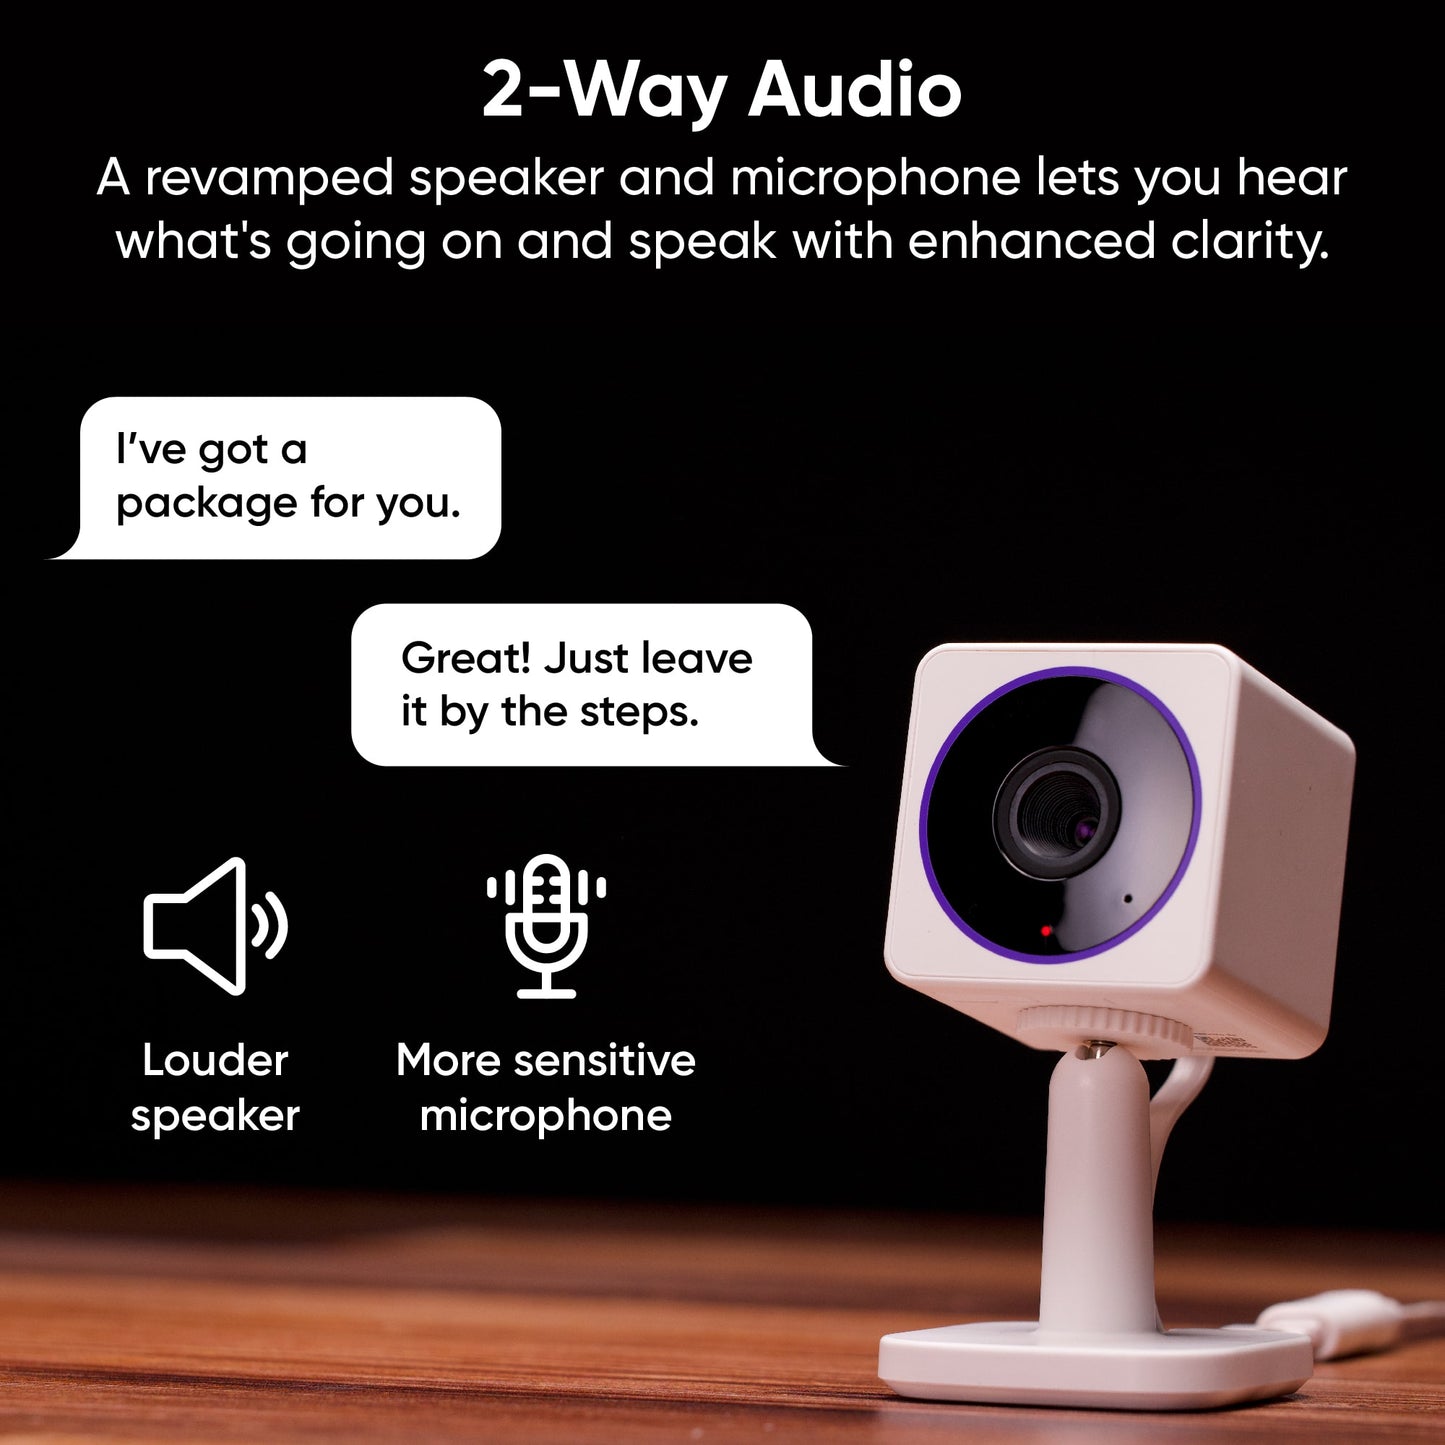 Wyze Cam OG Telephoto standing on wood floor with black background. Text overlay that says "2 Way Audio."